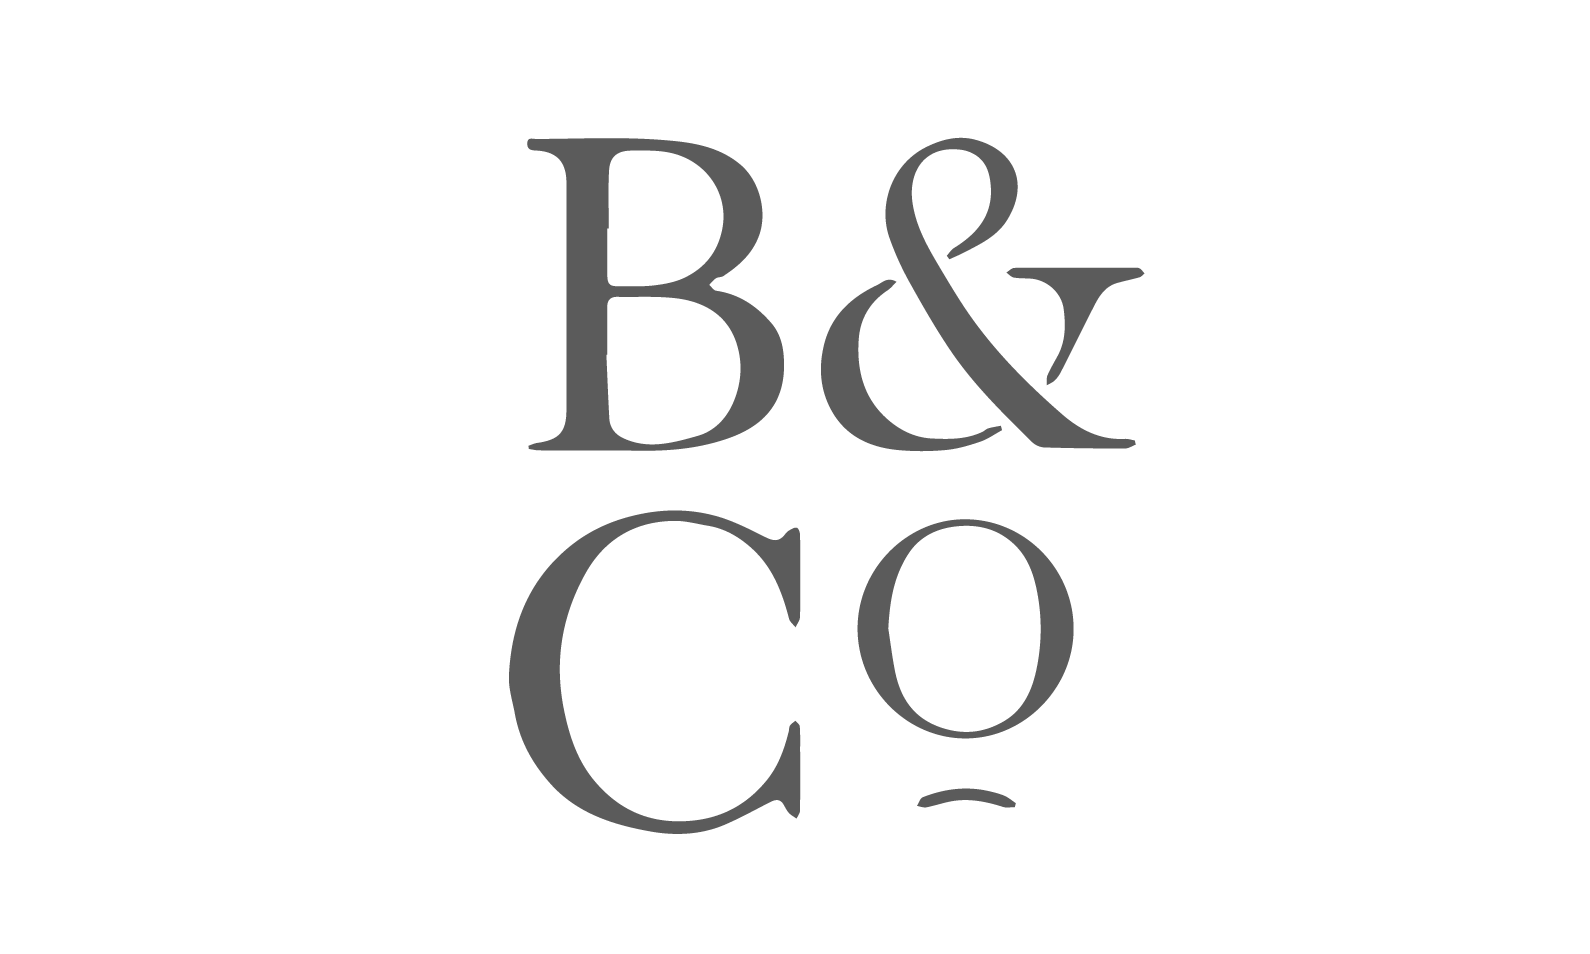 booth and co logo